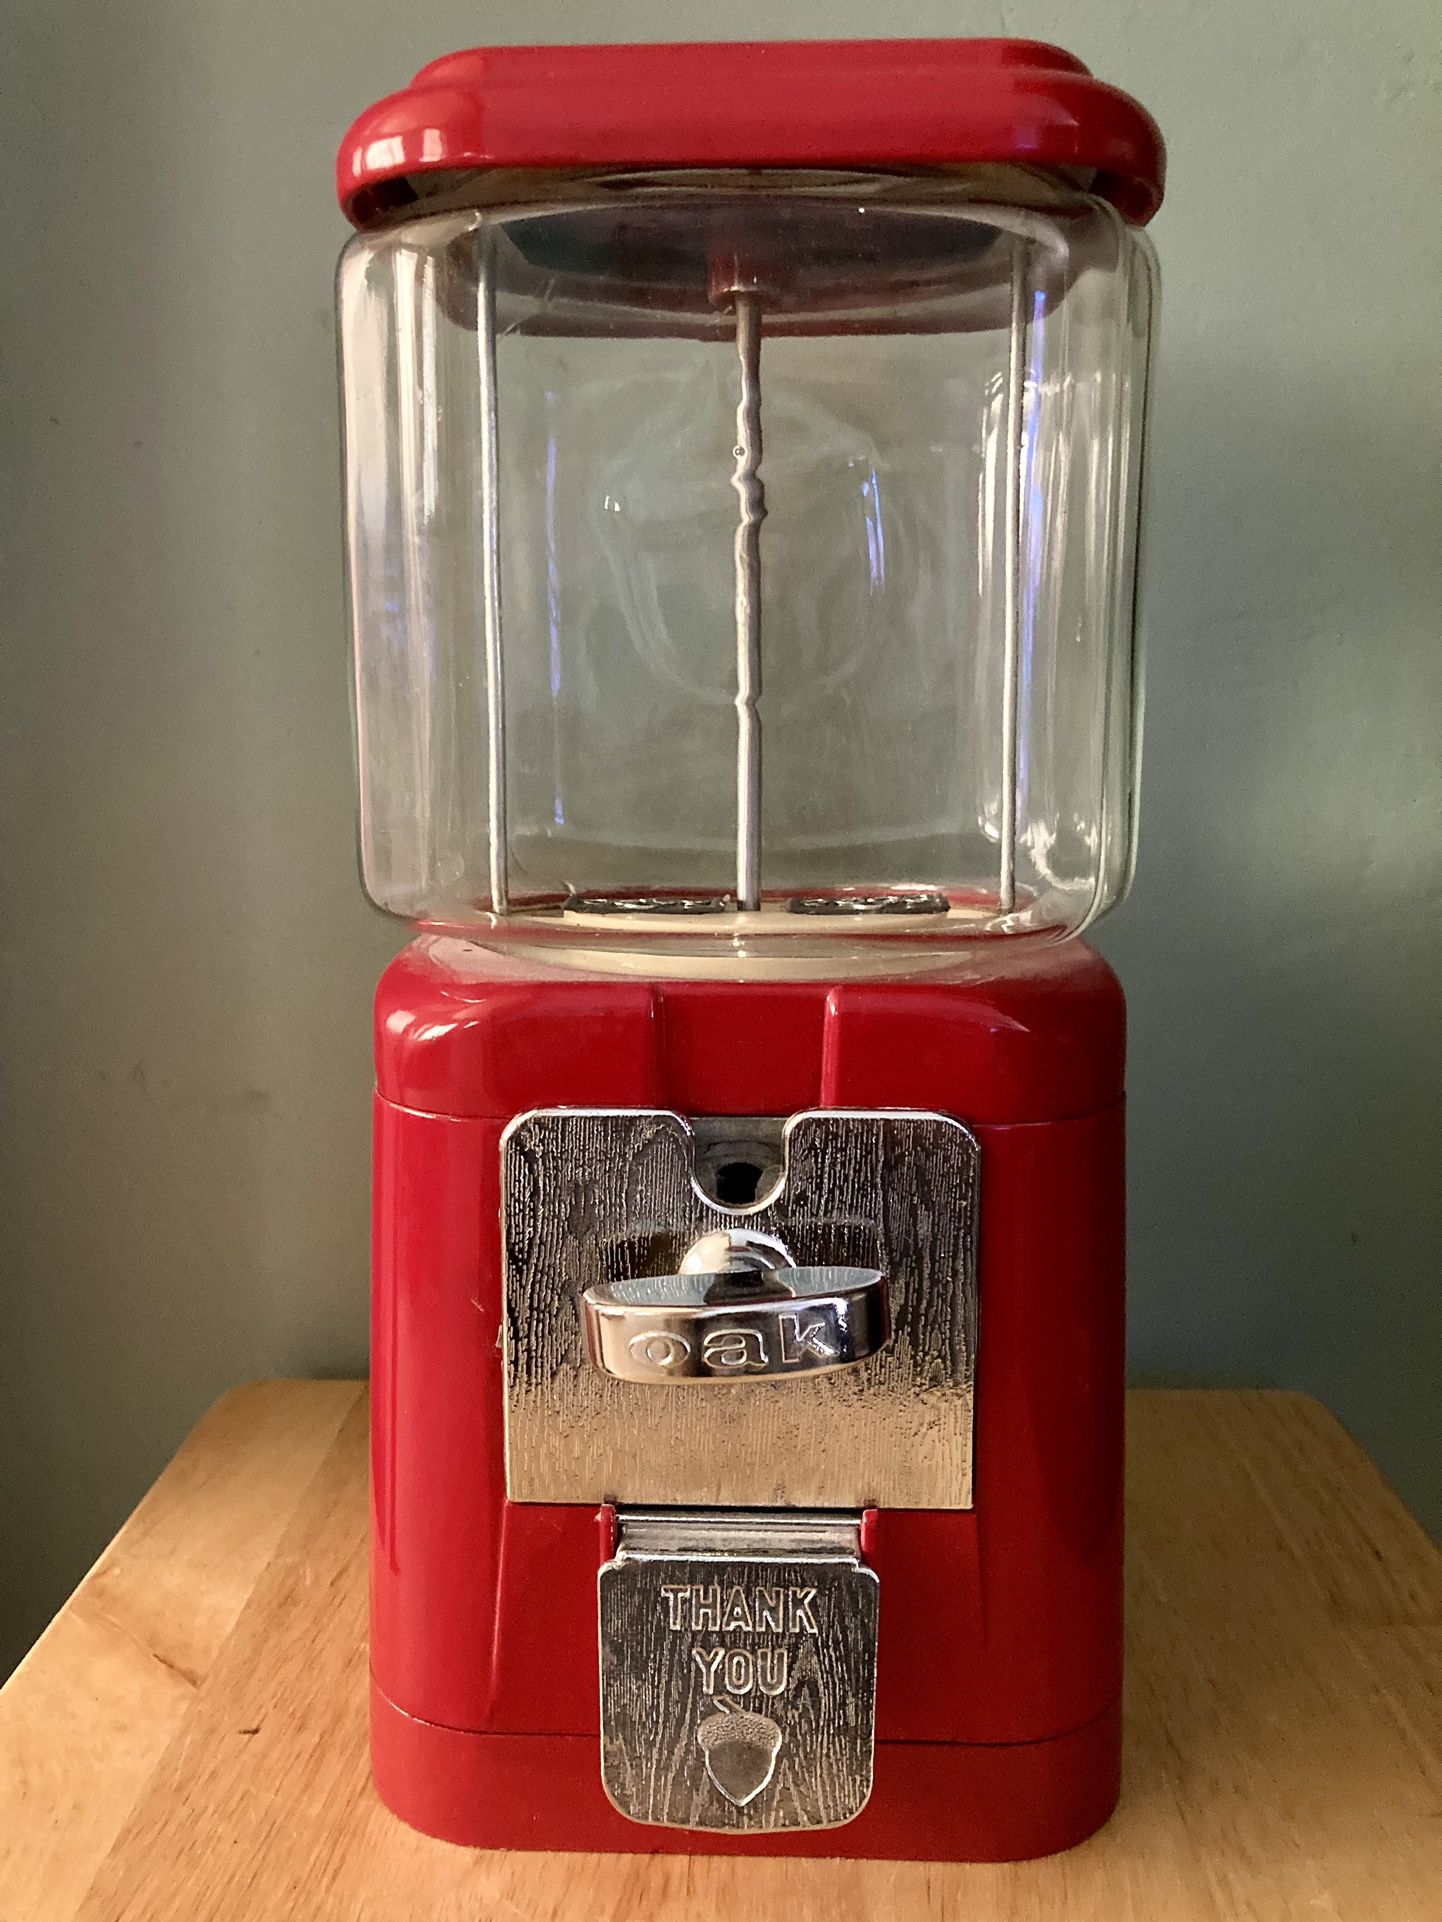 Limited Edition Year 2000 Acorn Brand Gumball Machine- Clean/Not Scratched/Excellent Condition!